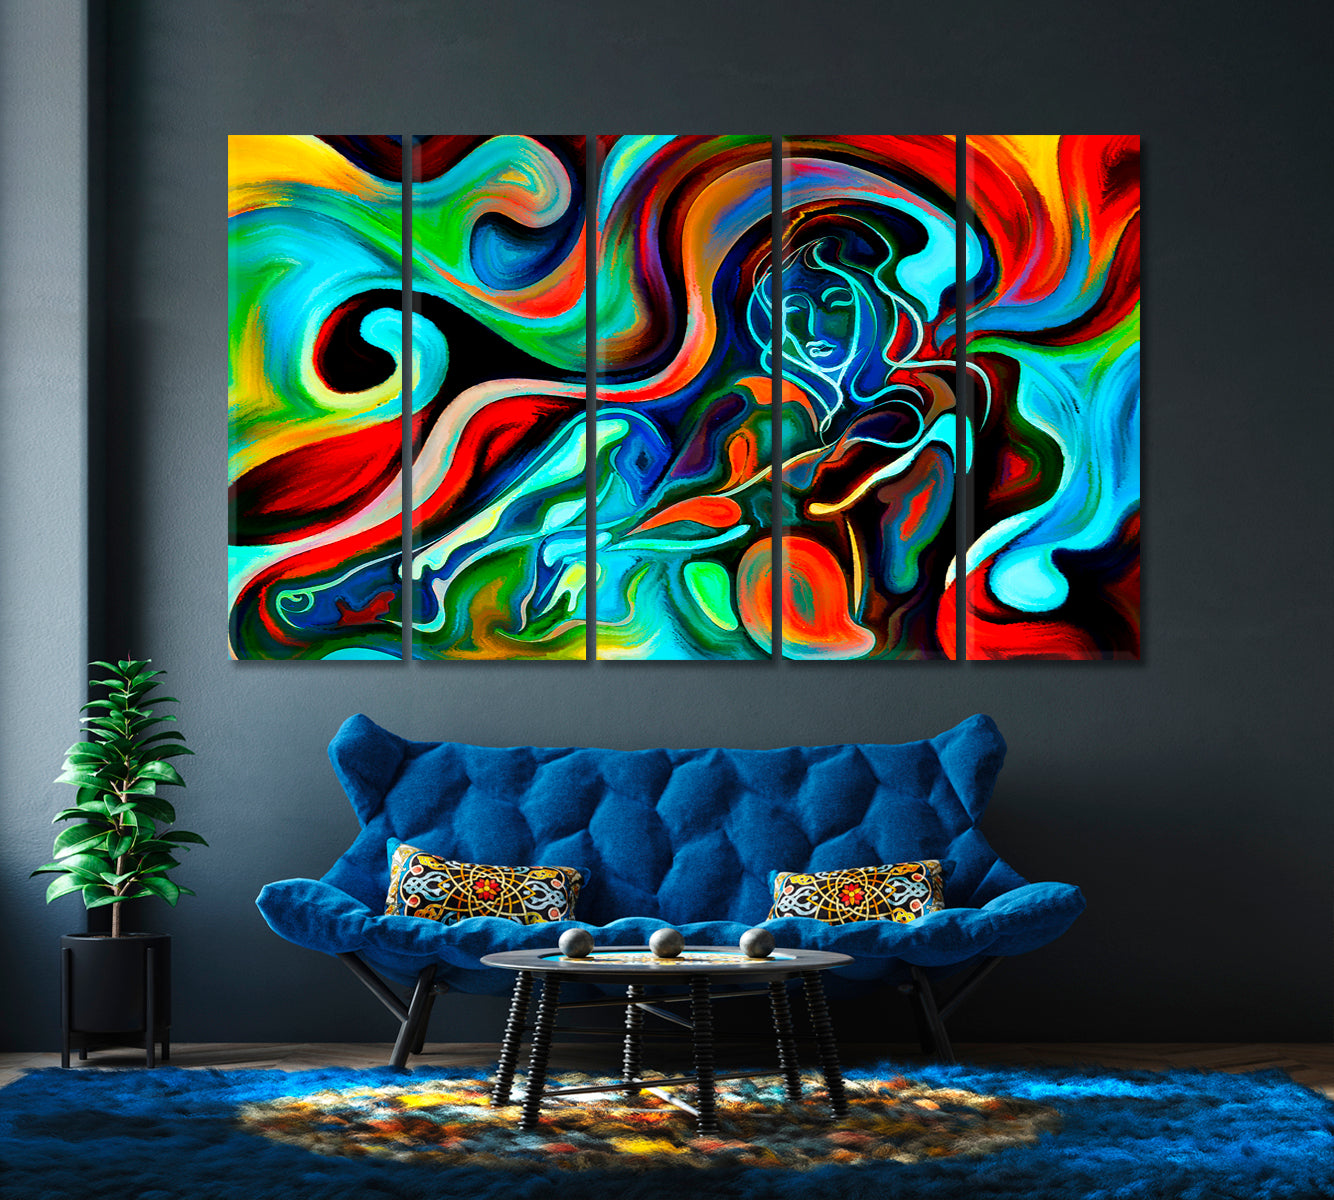 Precognition and Inner Vision Abstract Art Print Artesty 5 panels 36" x 24" 